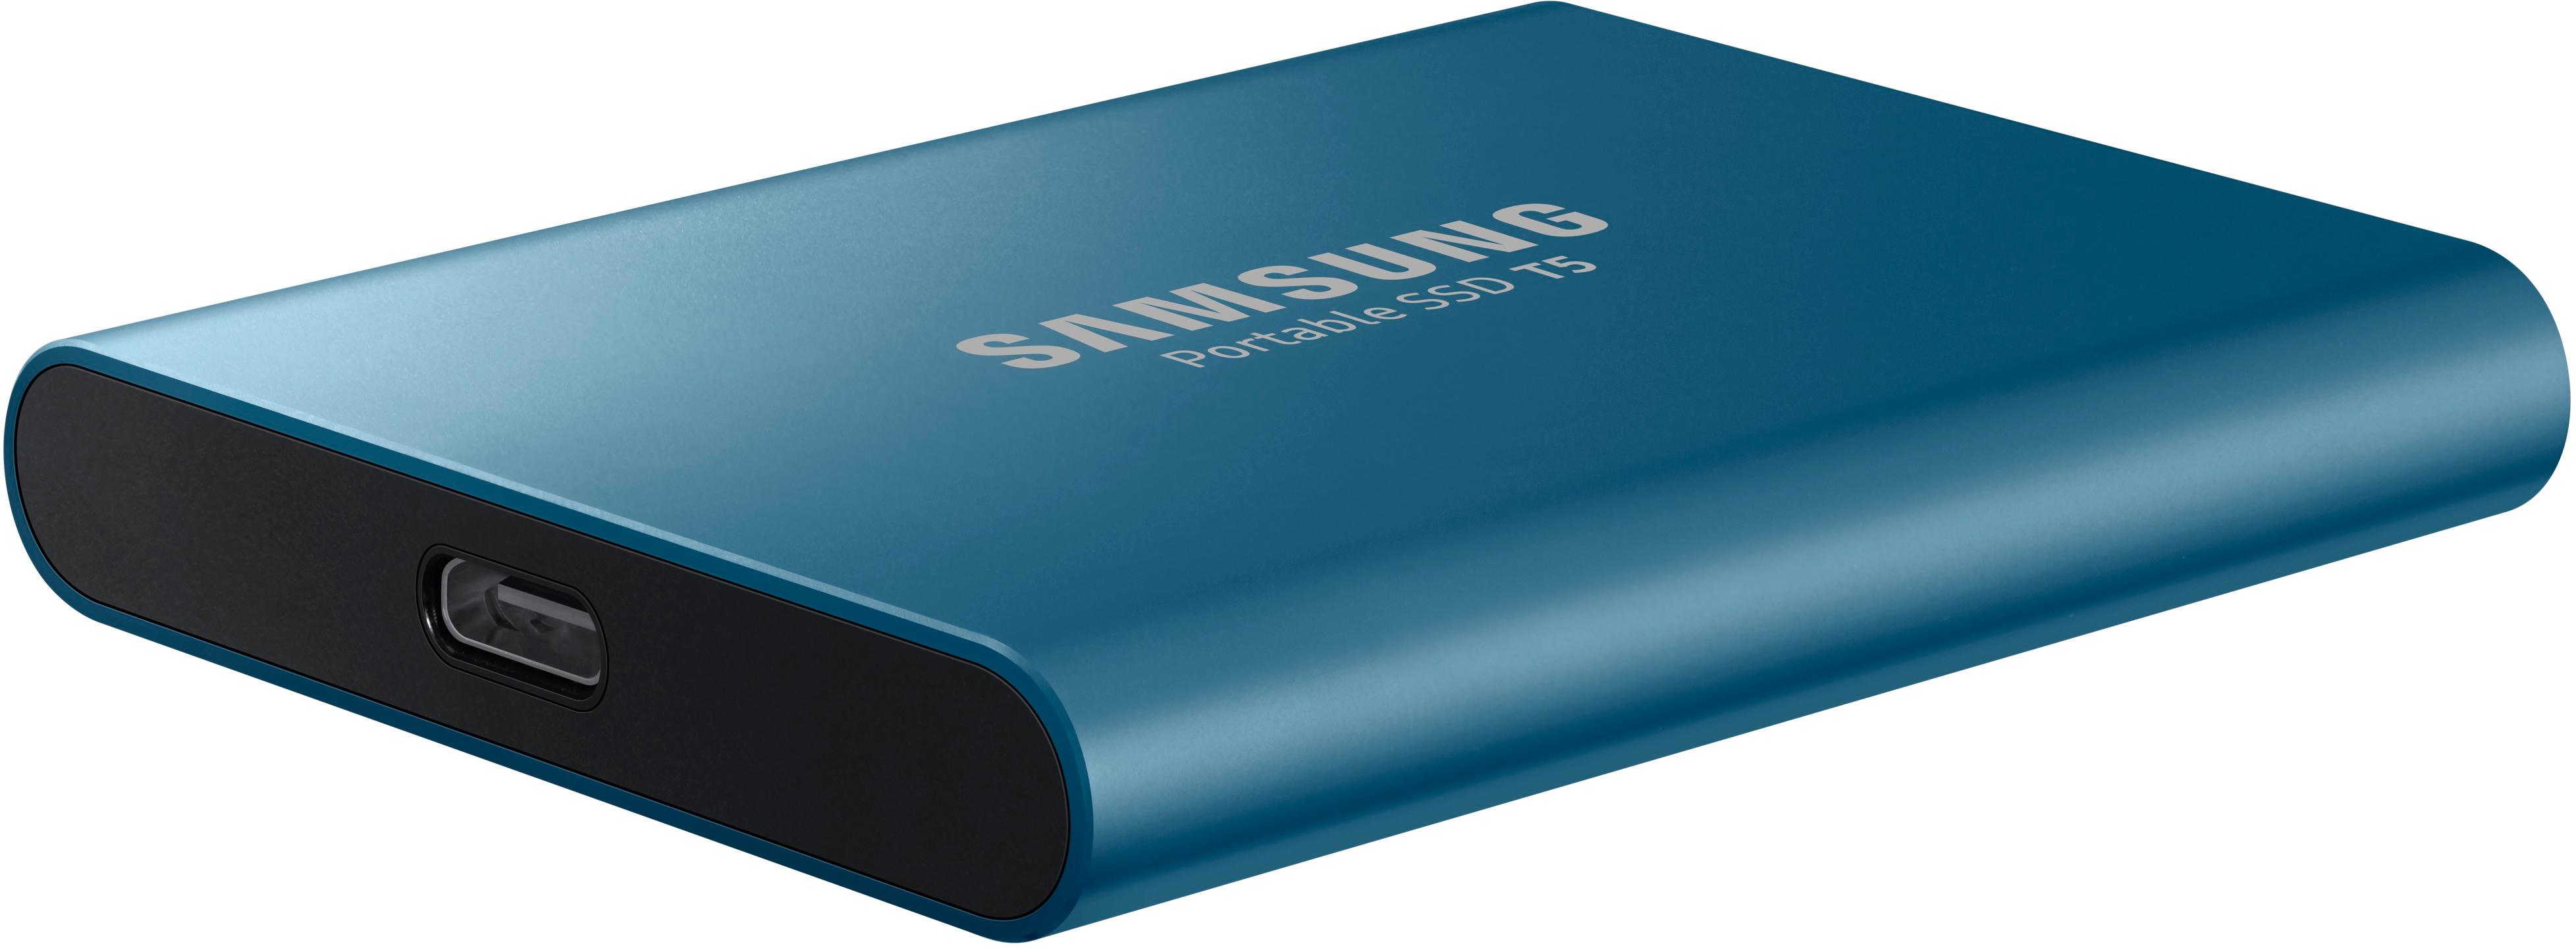 Best Buy: Samsung T5 500GB External USB Type C Portable Solid